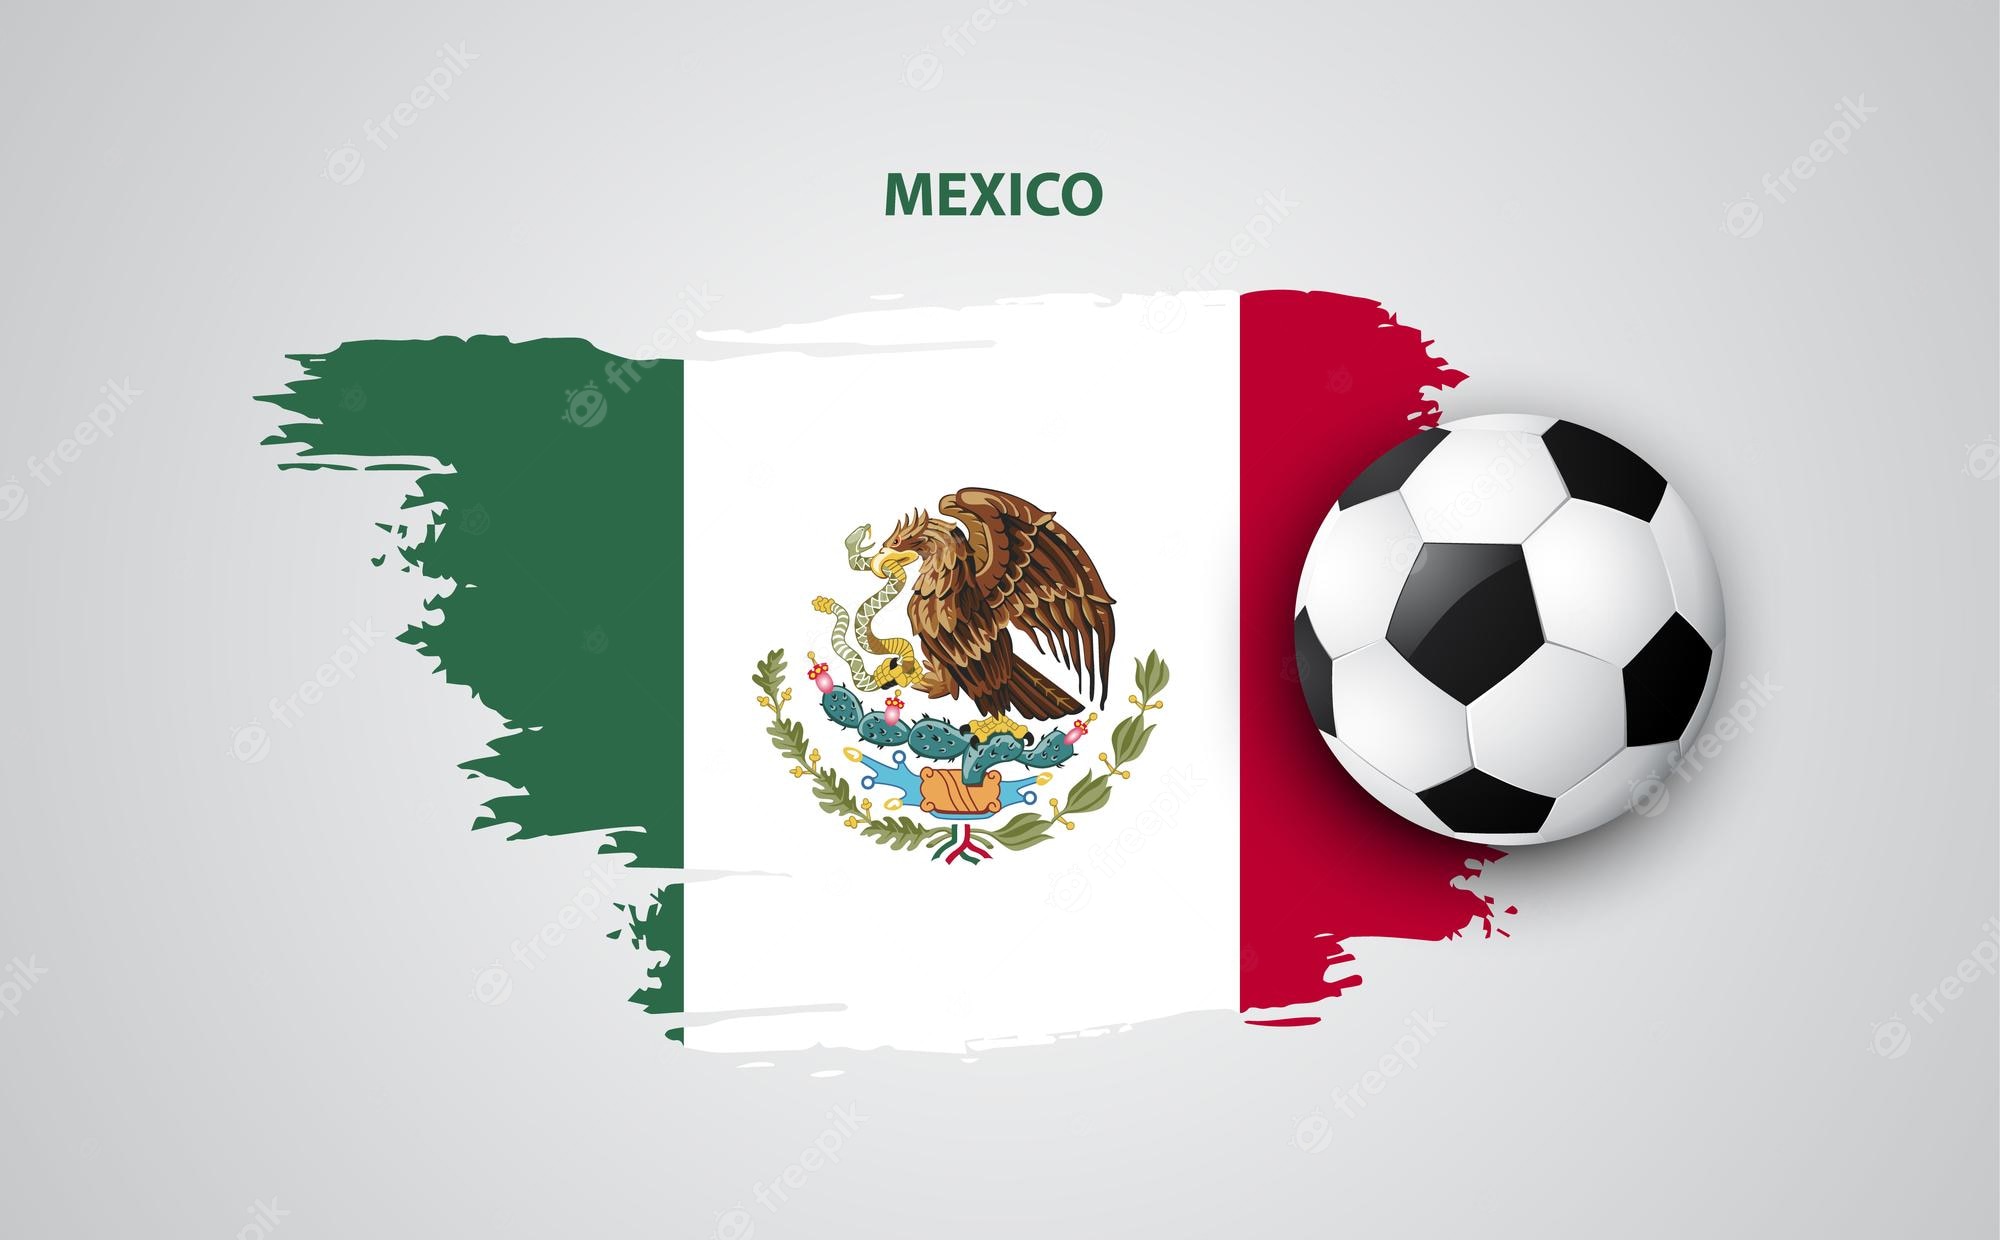 Mexico soccer images